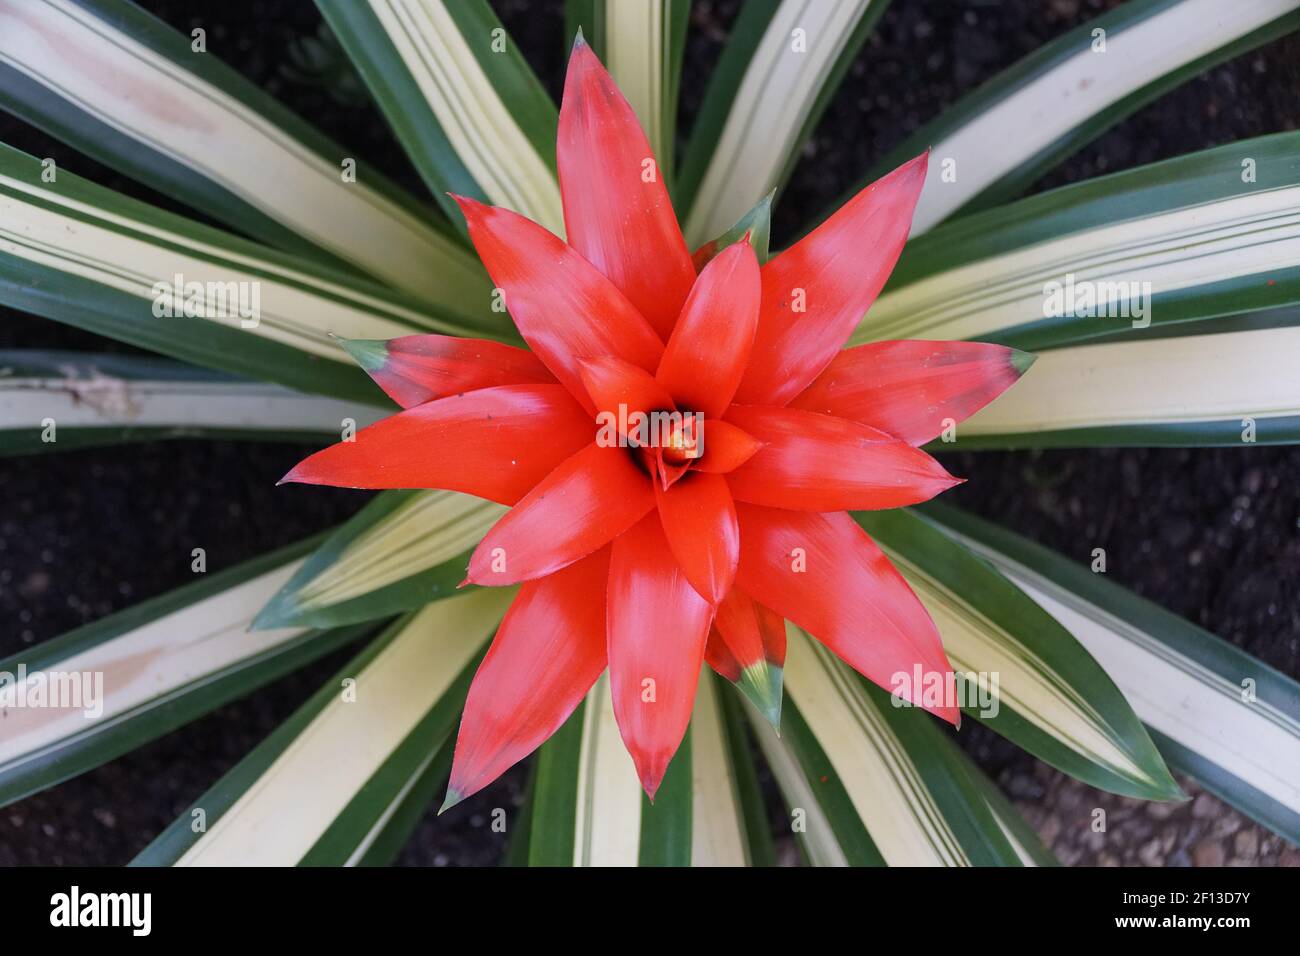 Green, white and bright red colors of Guzmania George plant Stock Photo